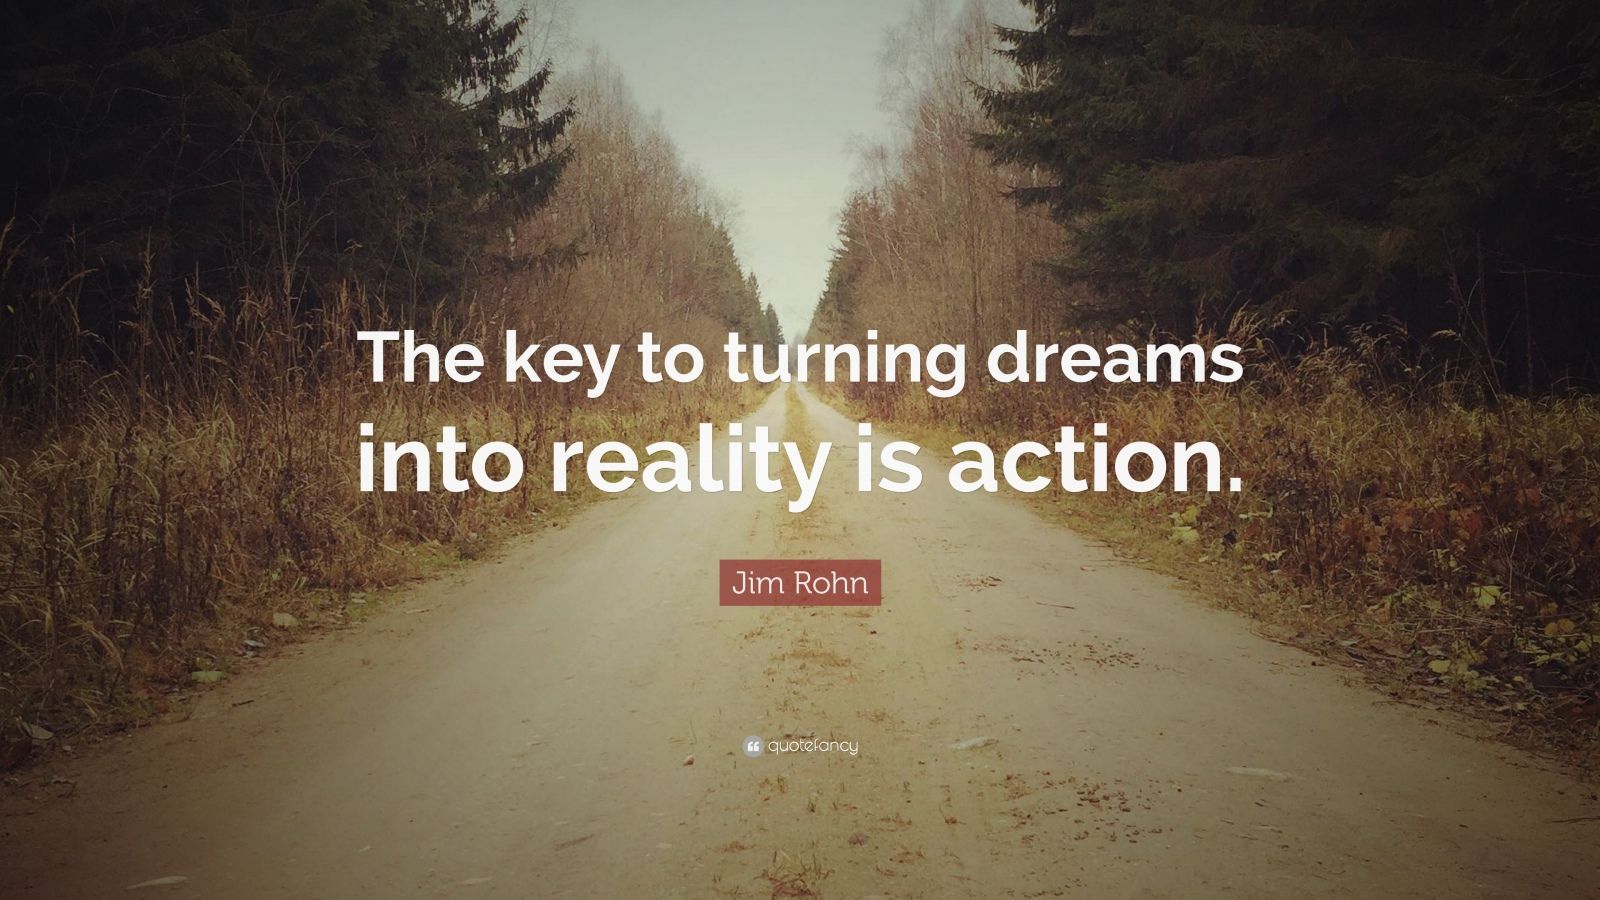 Jim Rohn Quote “the Key To Turning Dreams Into Reality Is Action” 12